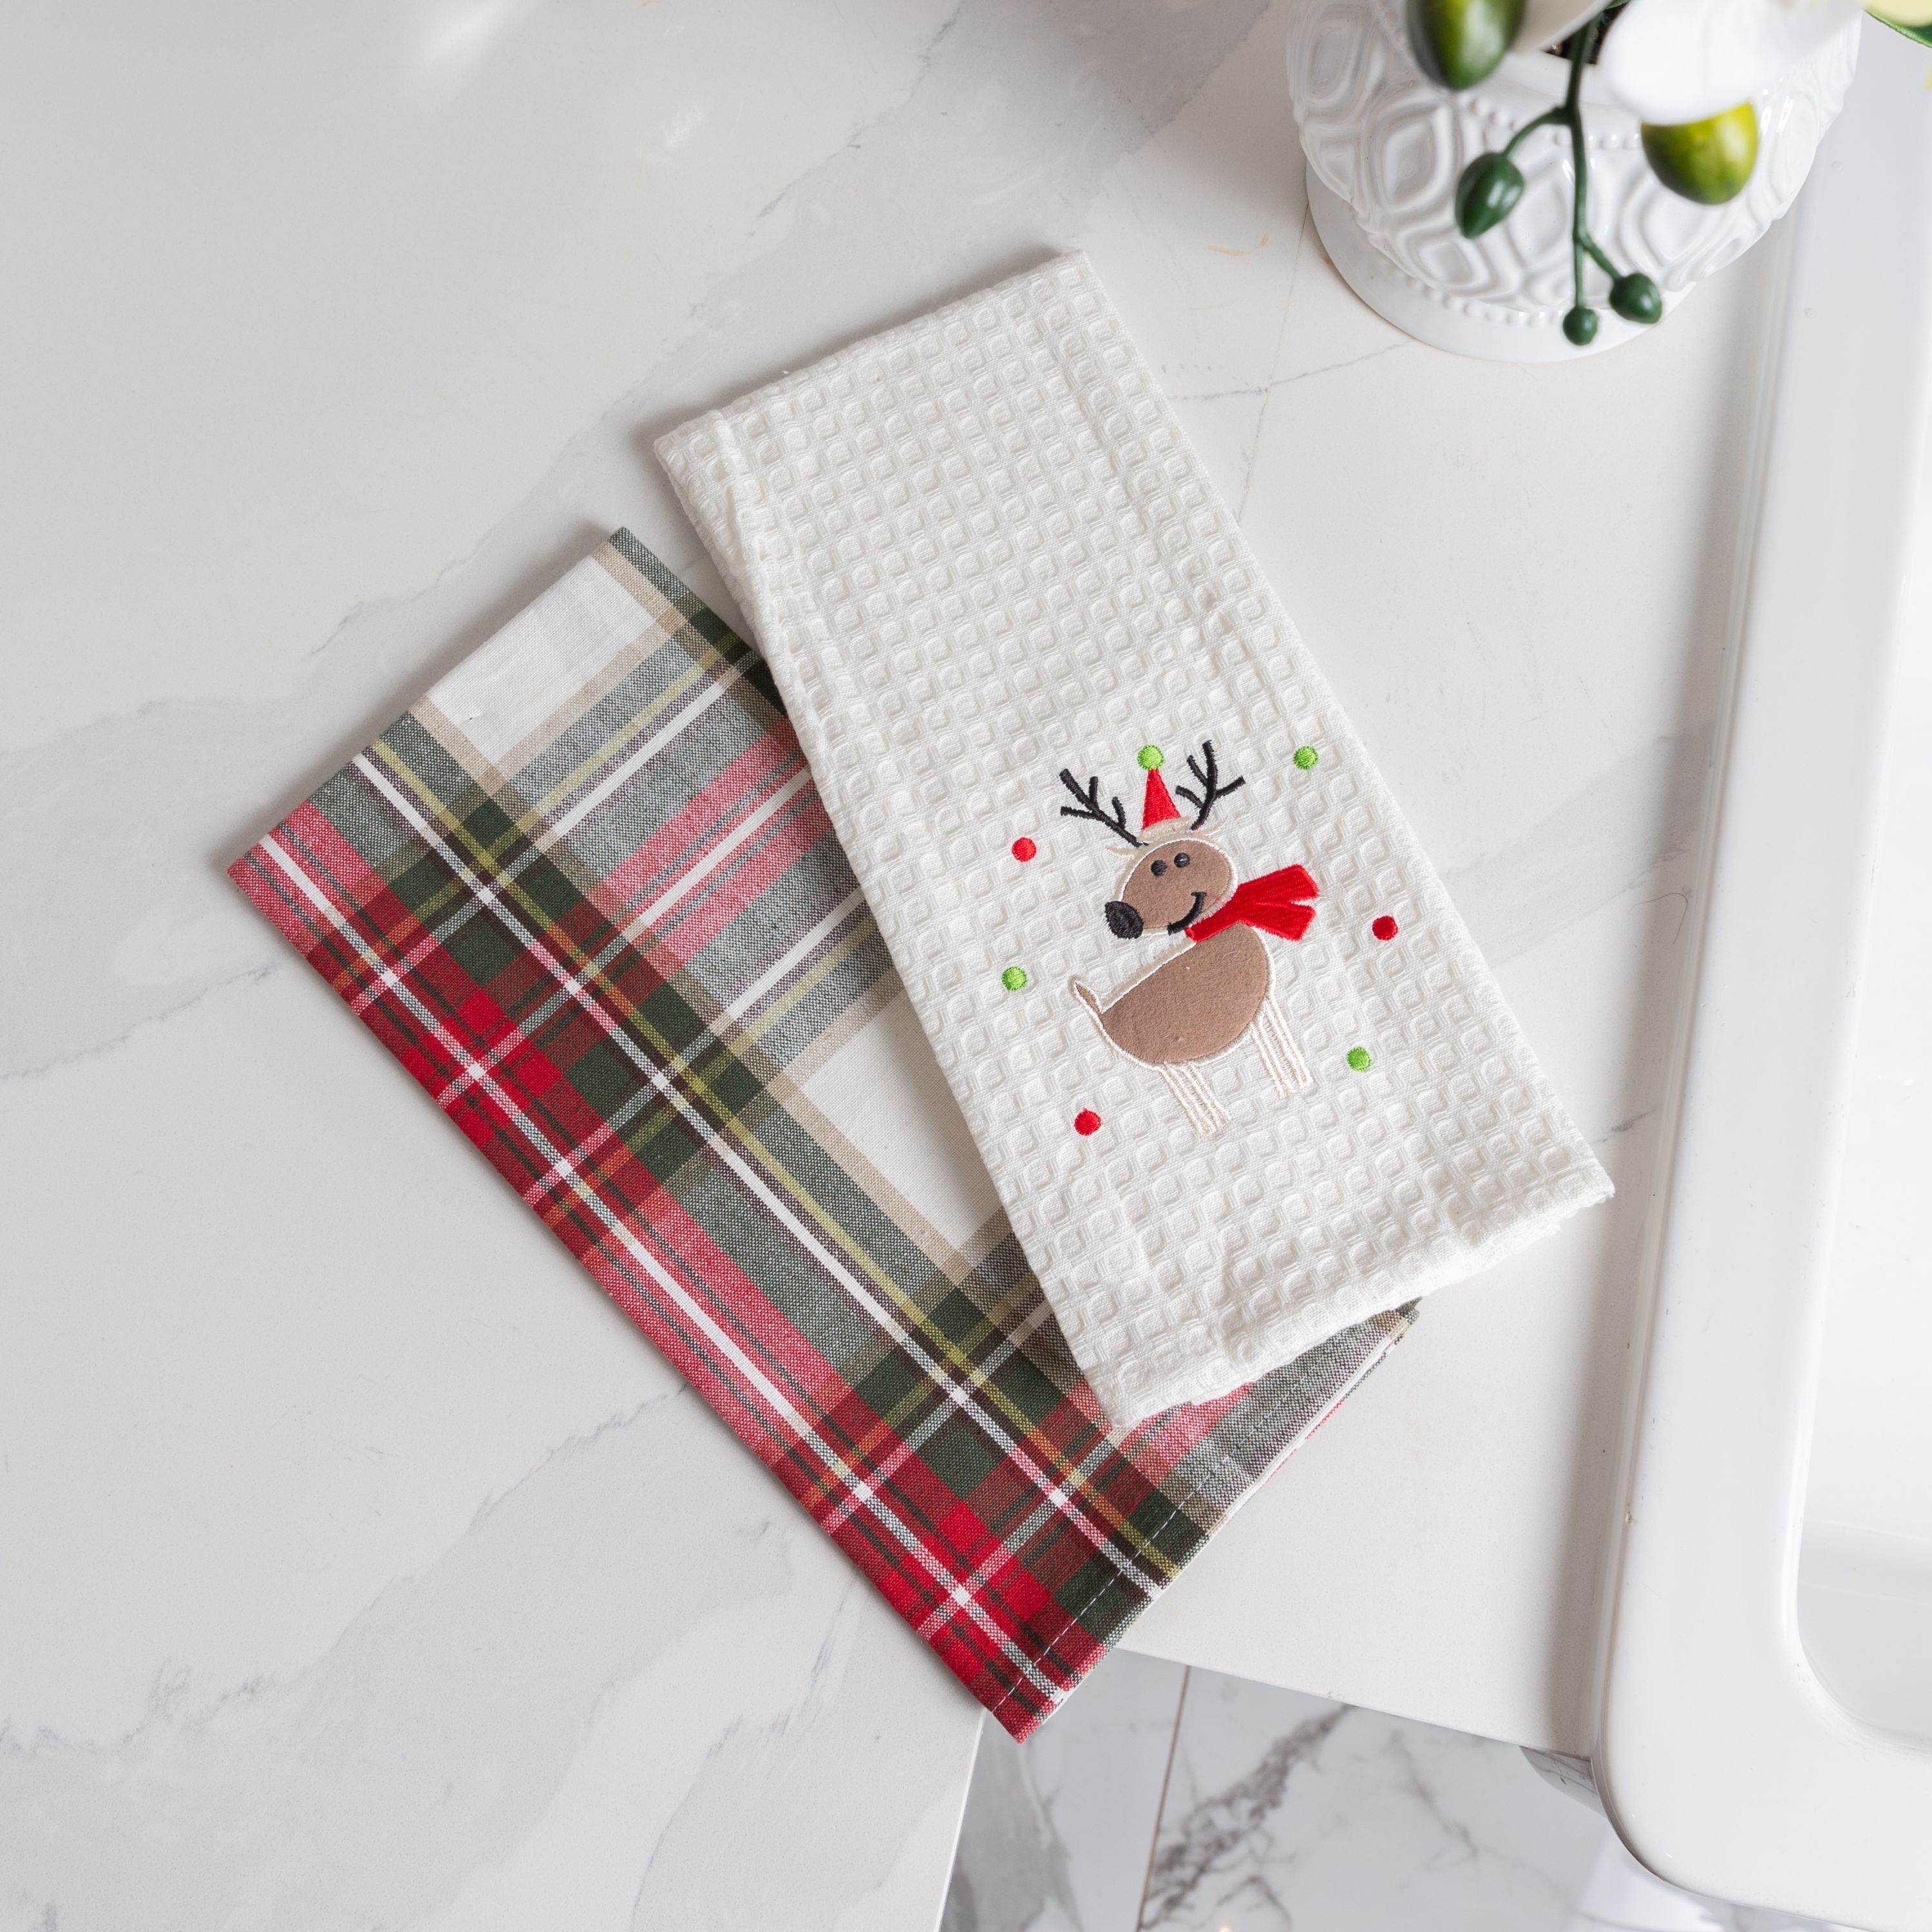 https://ak1.ostkcdn.com/images/products/is/images/direct/e9b9906c4254d83ef8d2f90e4a35b84aff422d41/Fabstyles-Celebration-Plaid-Reindeer-Set-of-2-Cotton-Kitchen-Towel.jpg